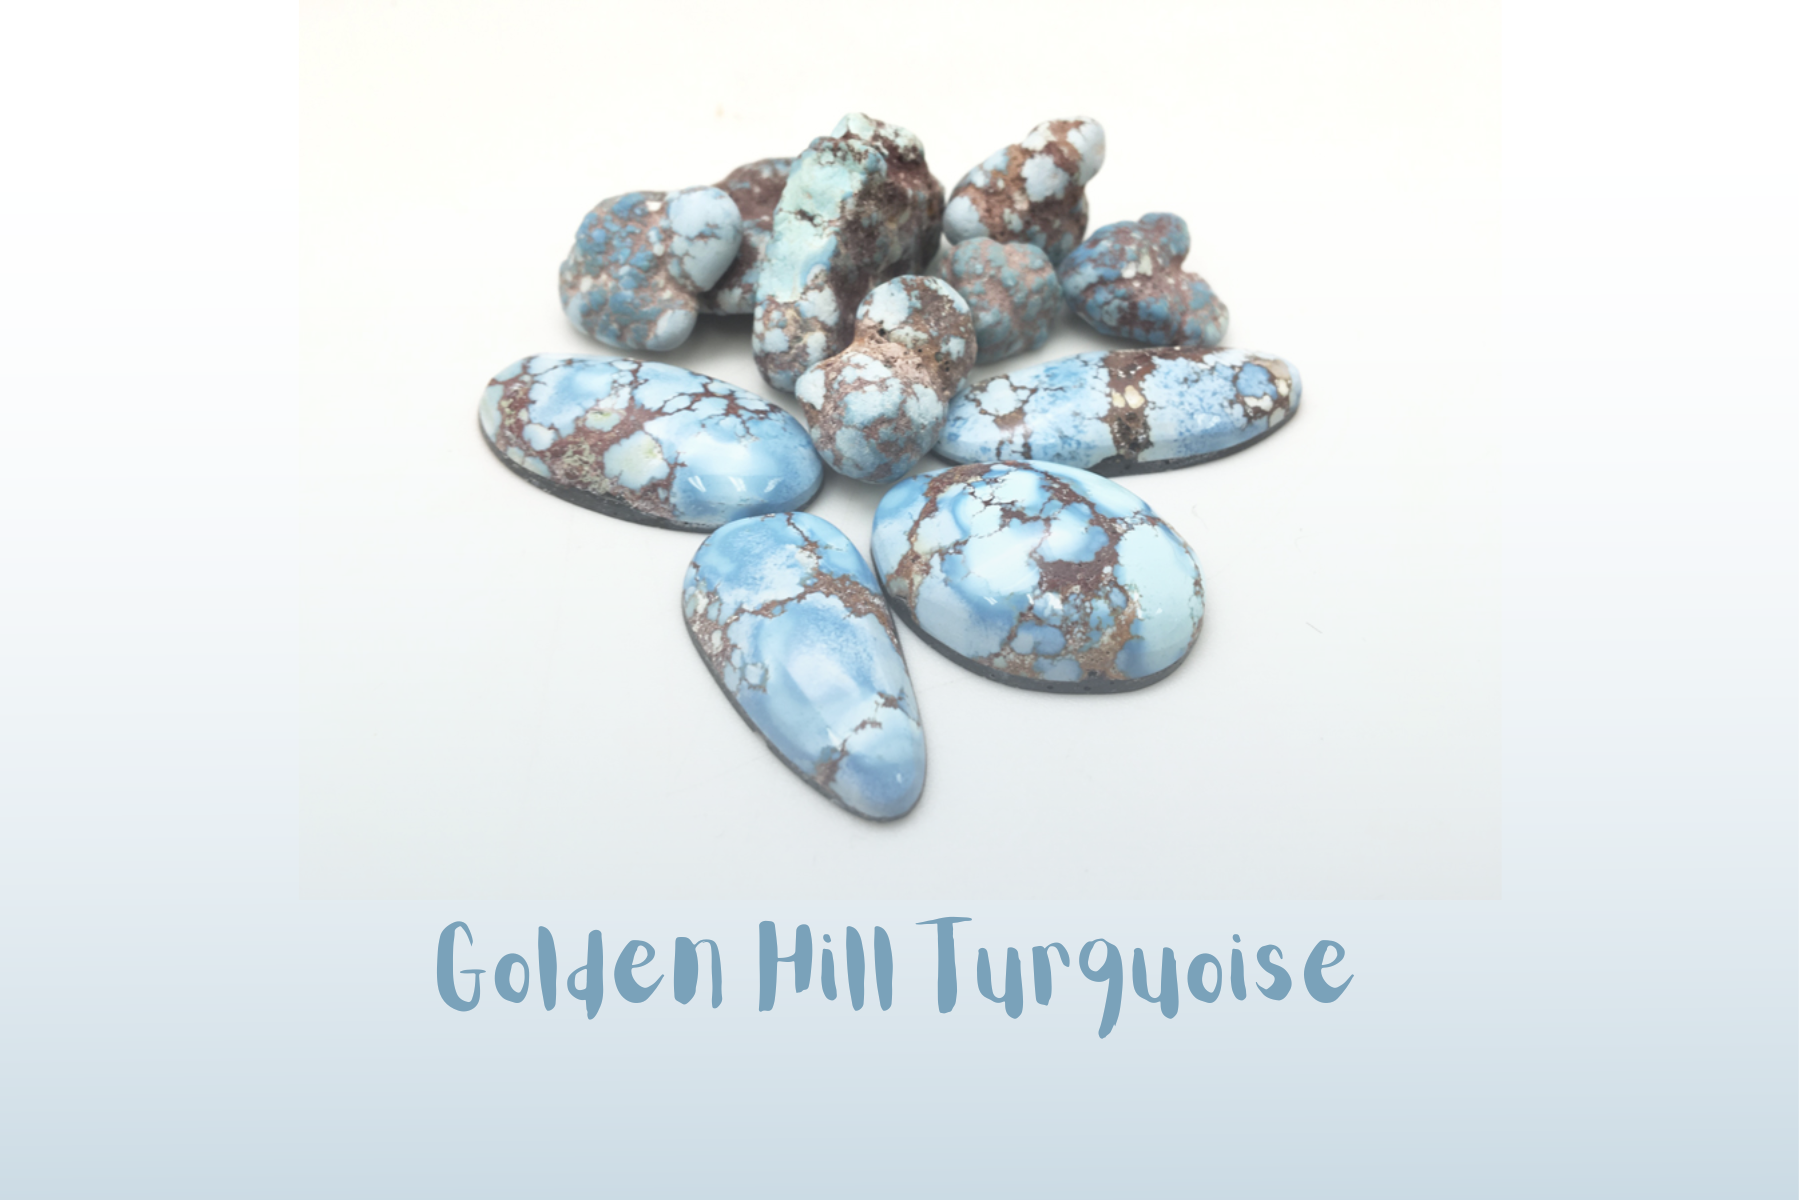 Eleven Golden Hill turquoise stones with black and blue shades